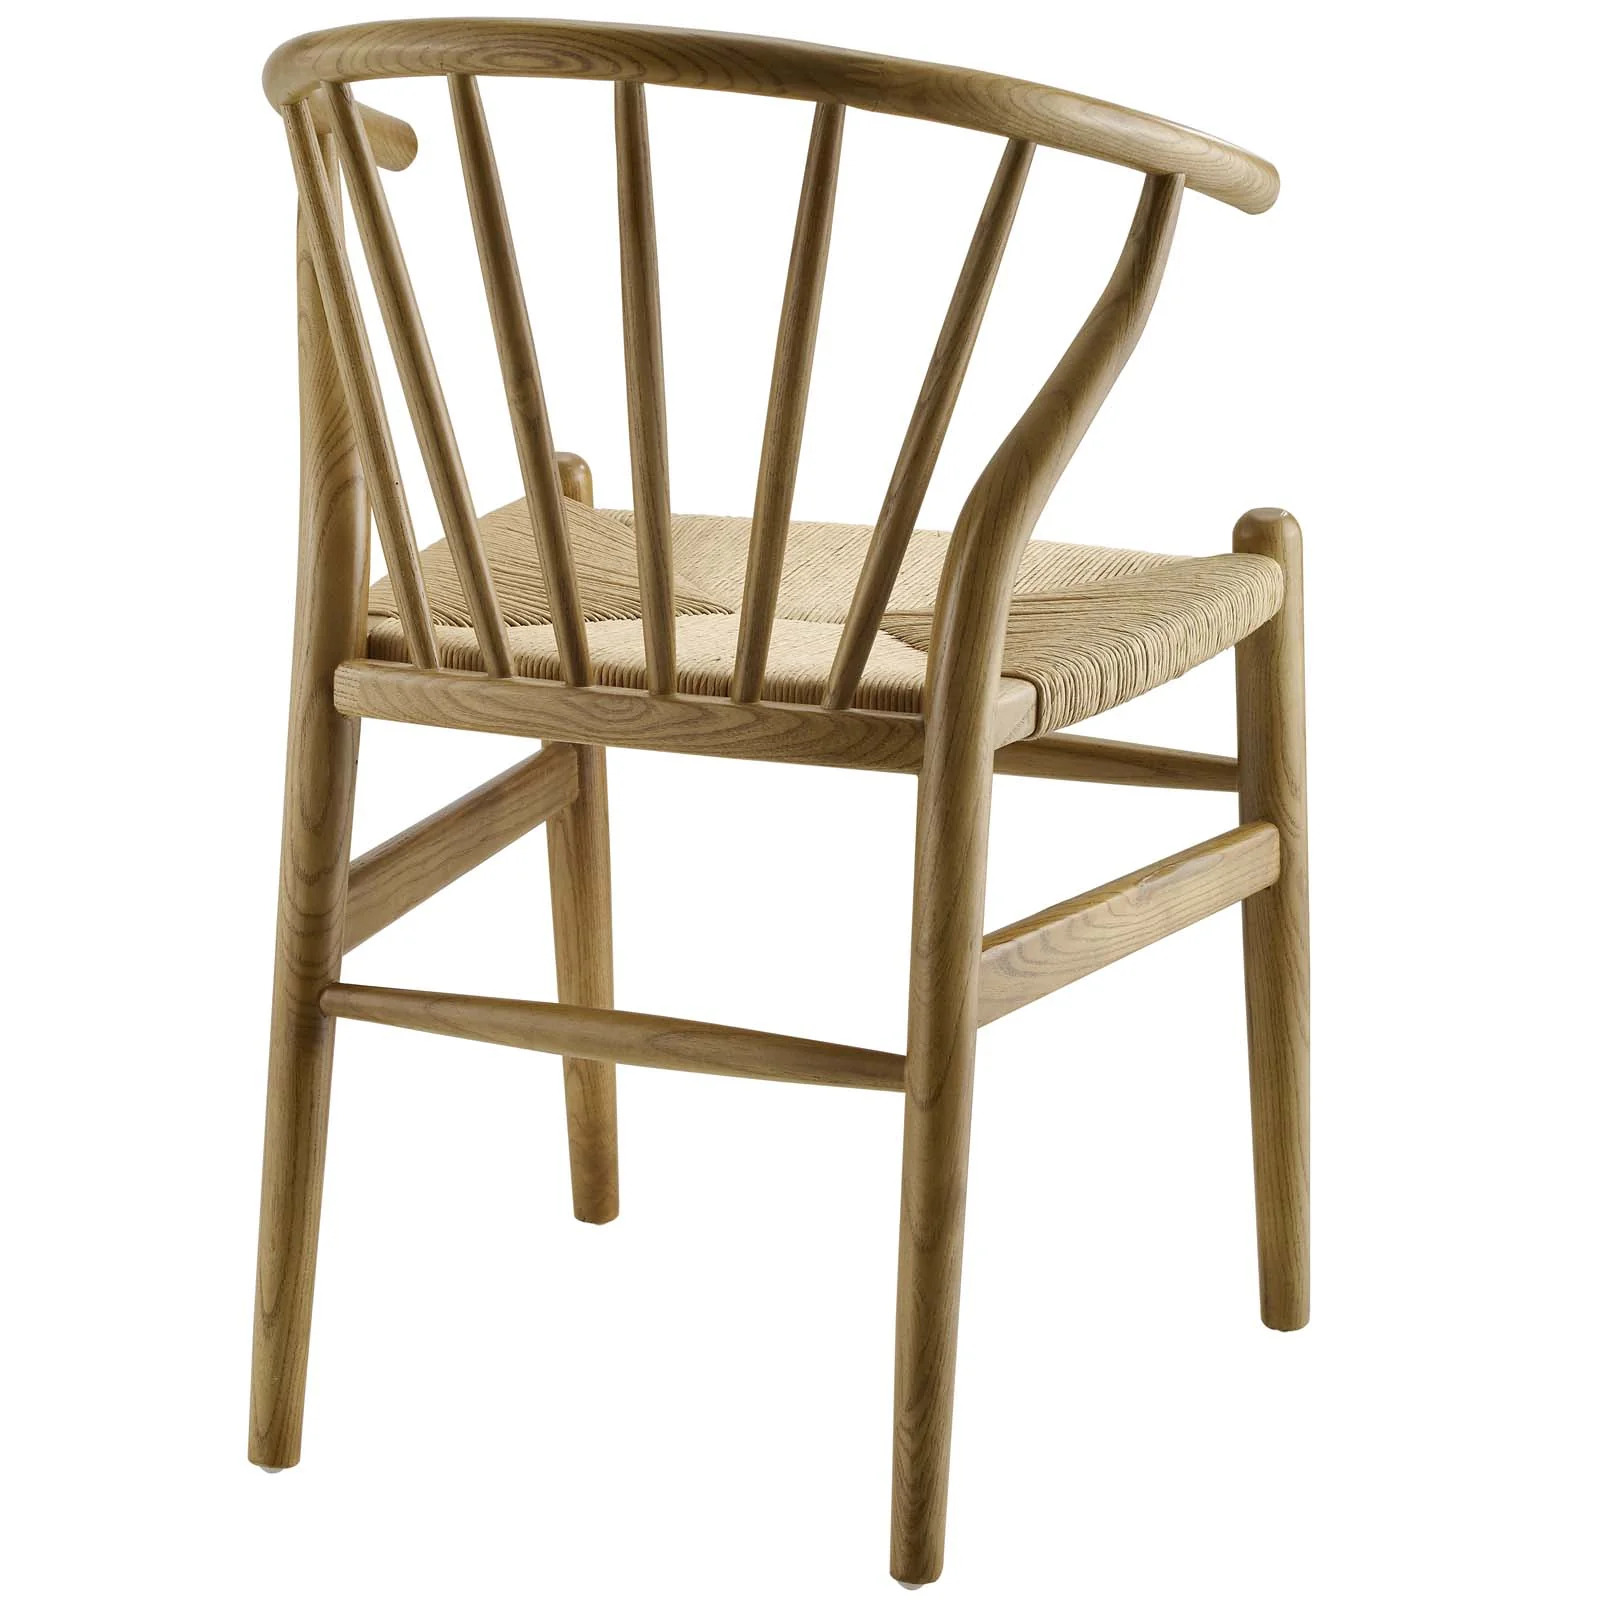 Modway Flourish Spindle Wood Dining Side Chair Set of 2 in Natural - image 3 of 4